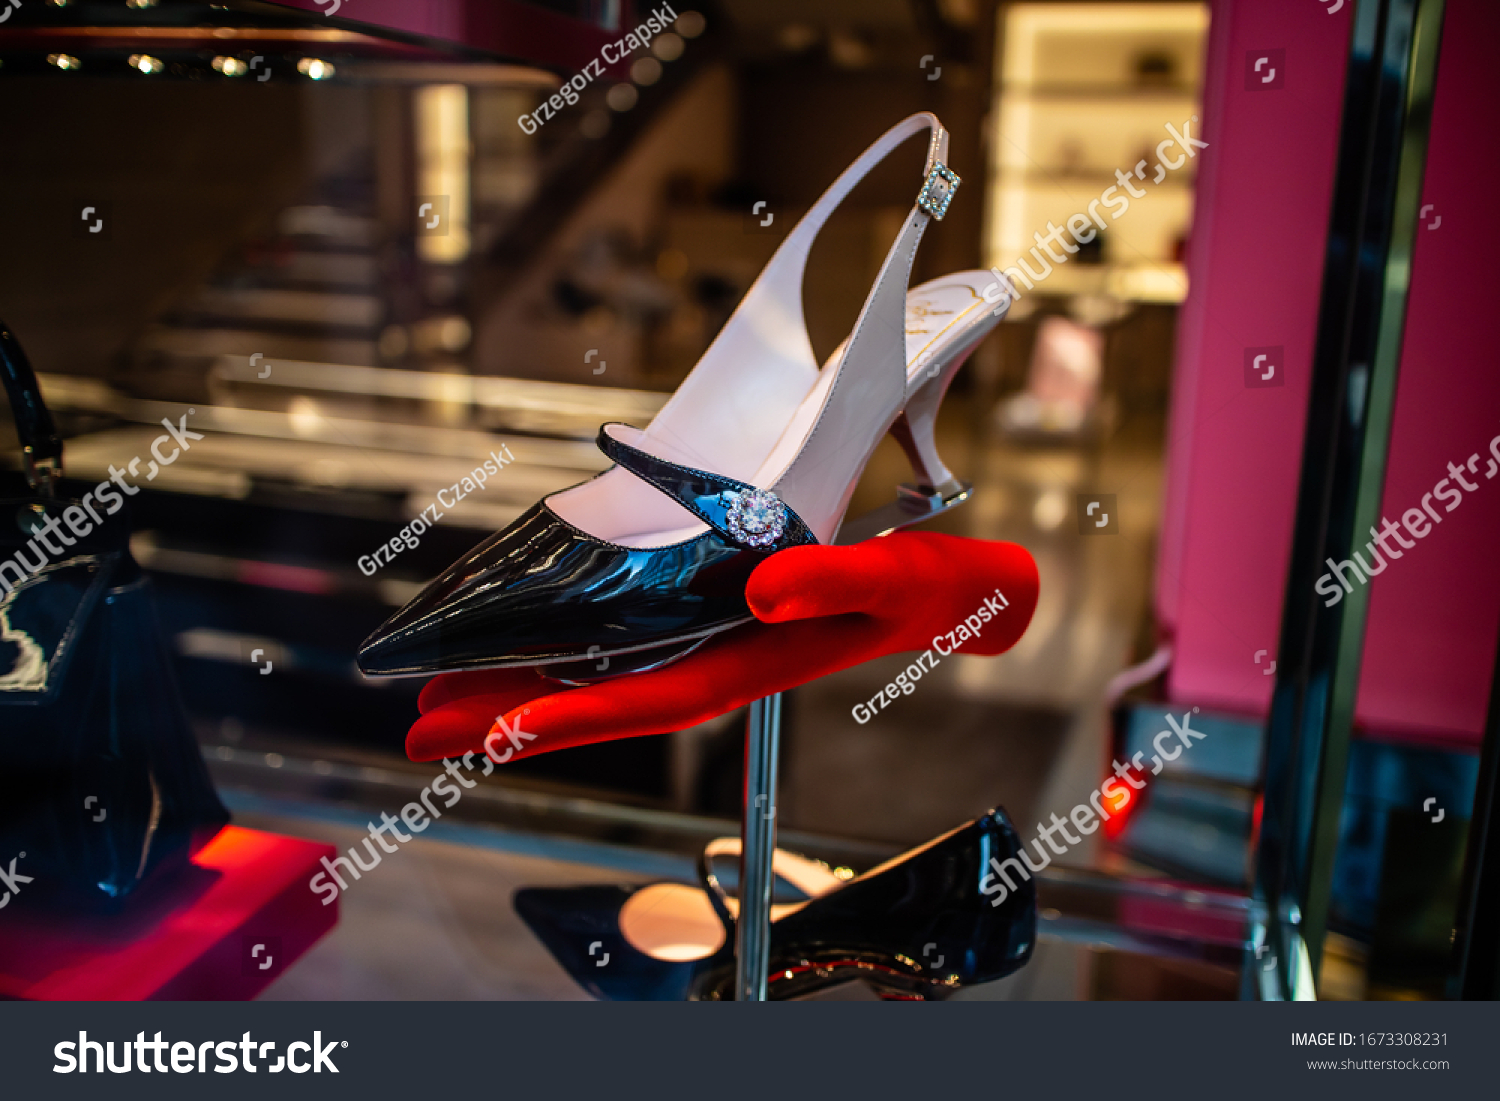 Shoes by roger vivier Images, Stock Photos & Vectors | Shutterstock